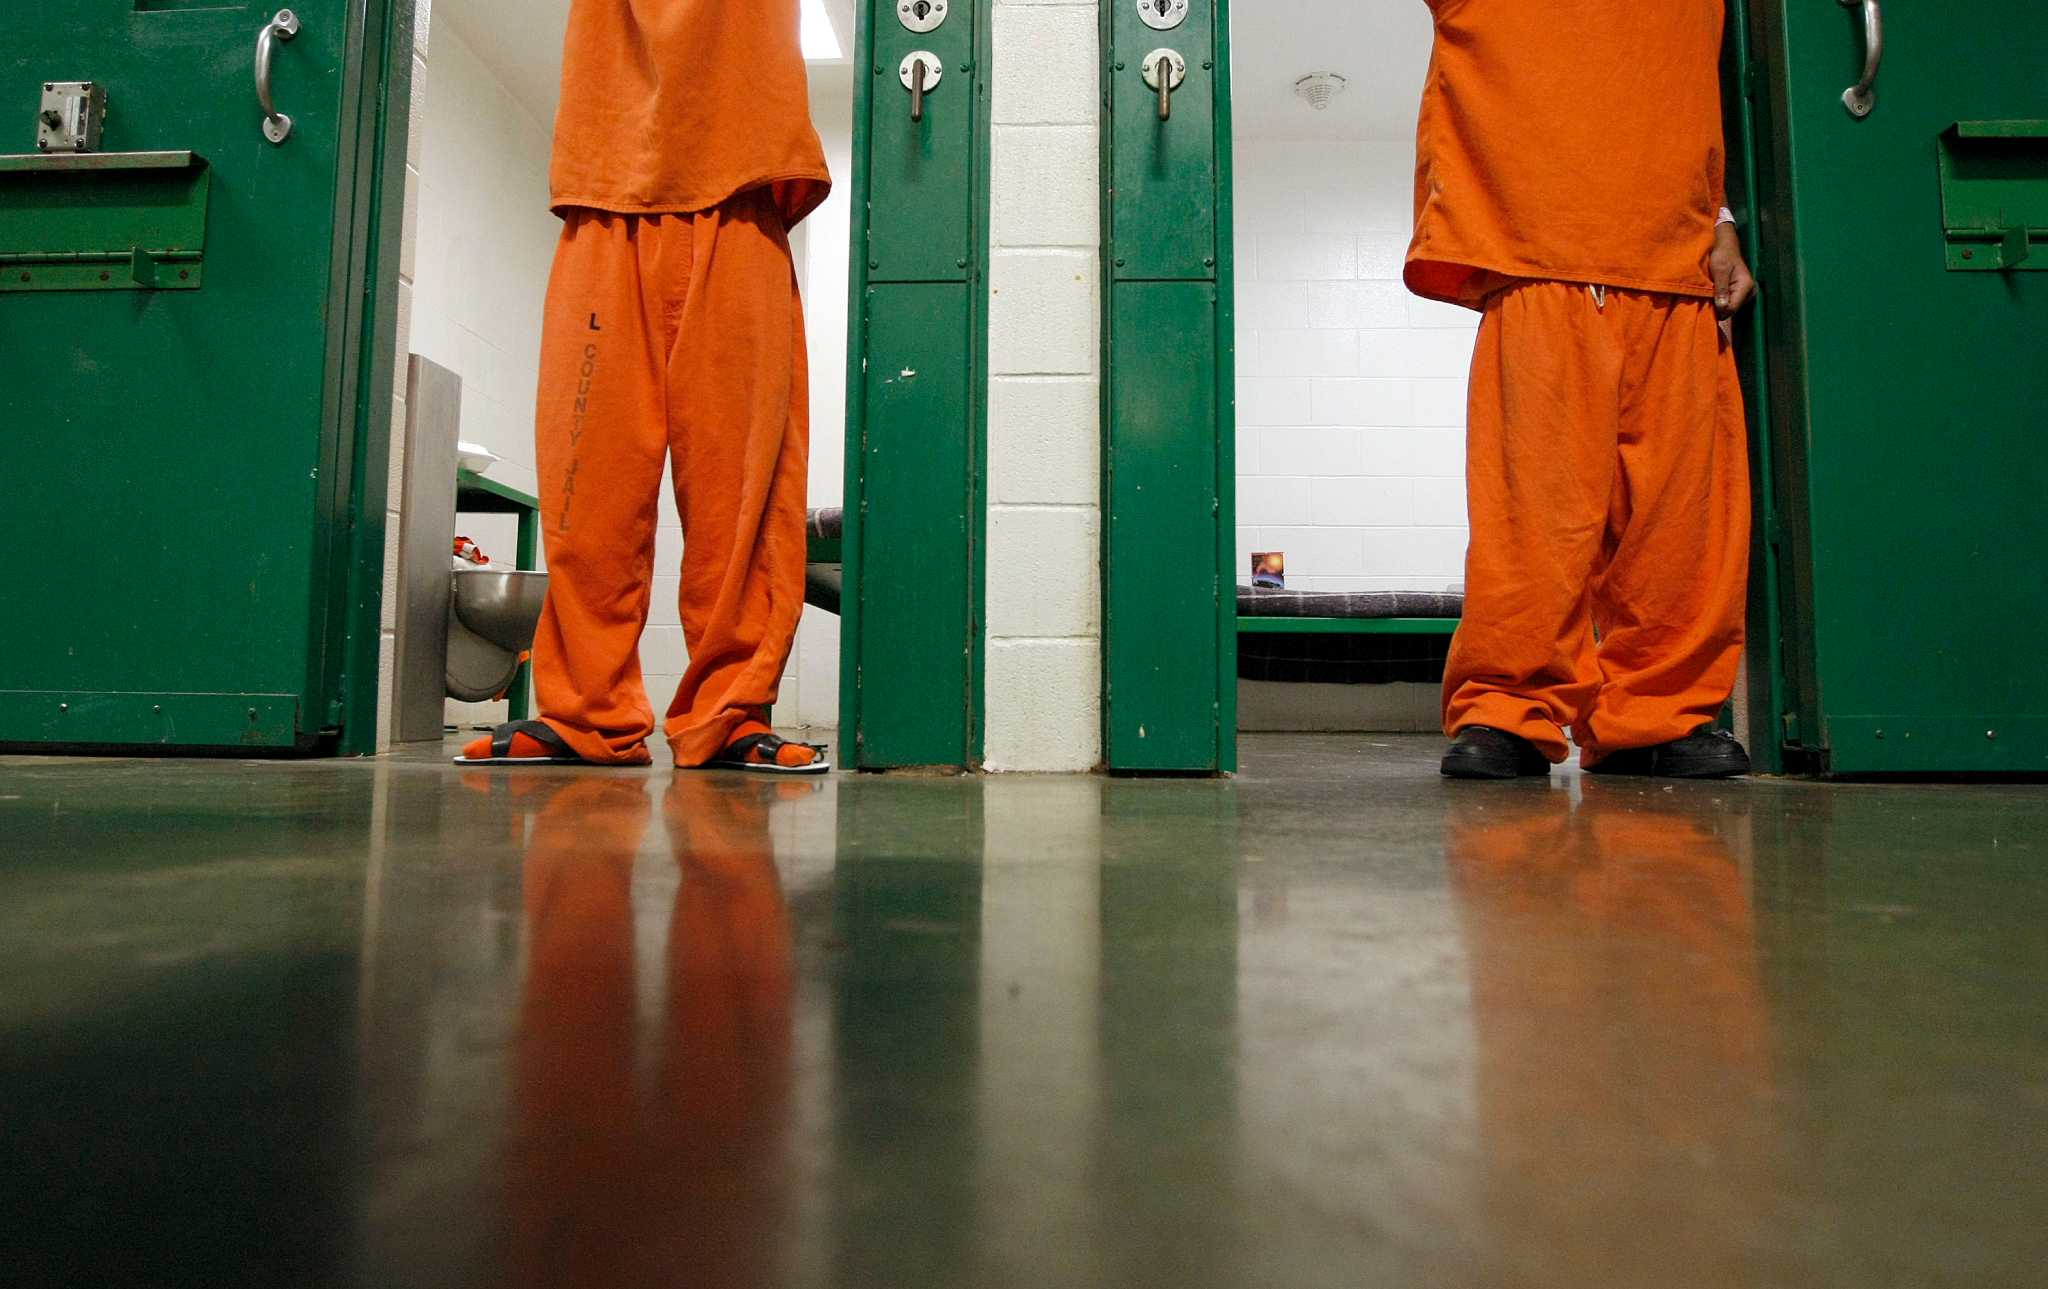 Juvenile justice agency still plagued by high recidivism, turnover